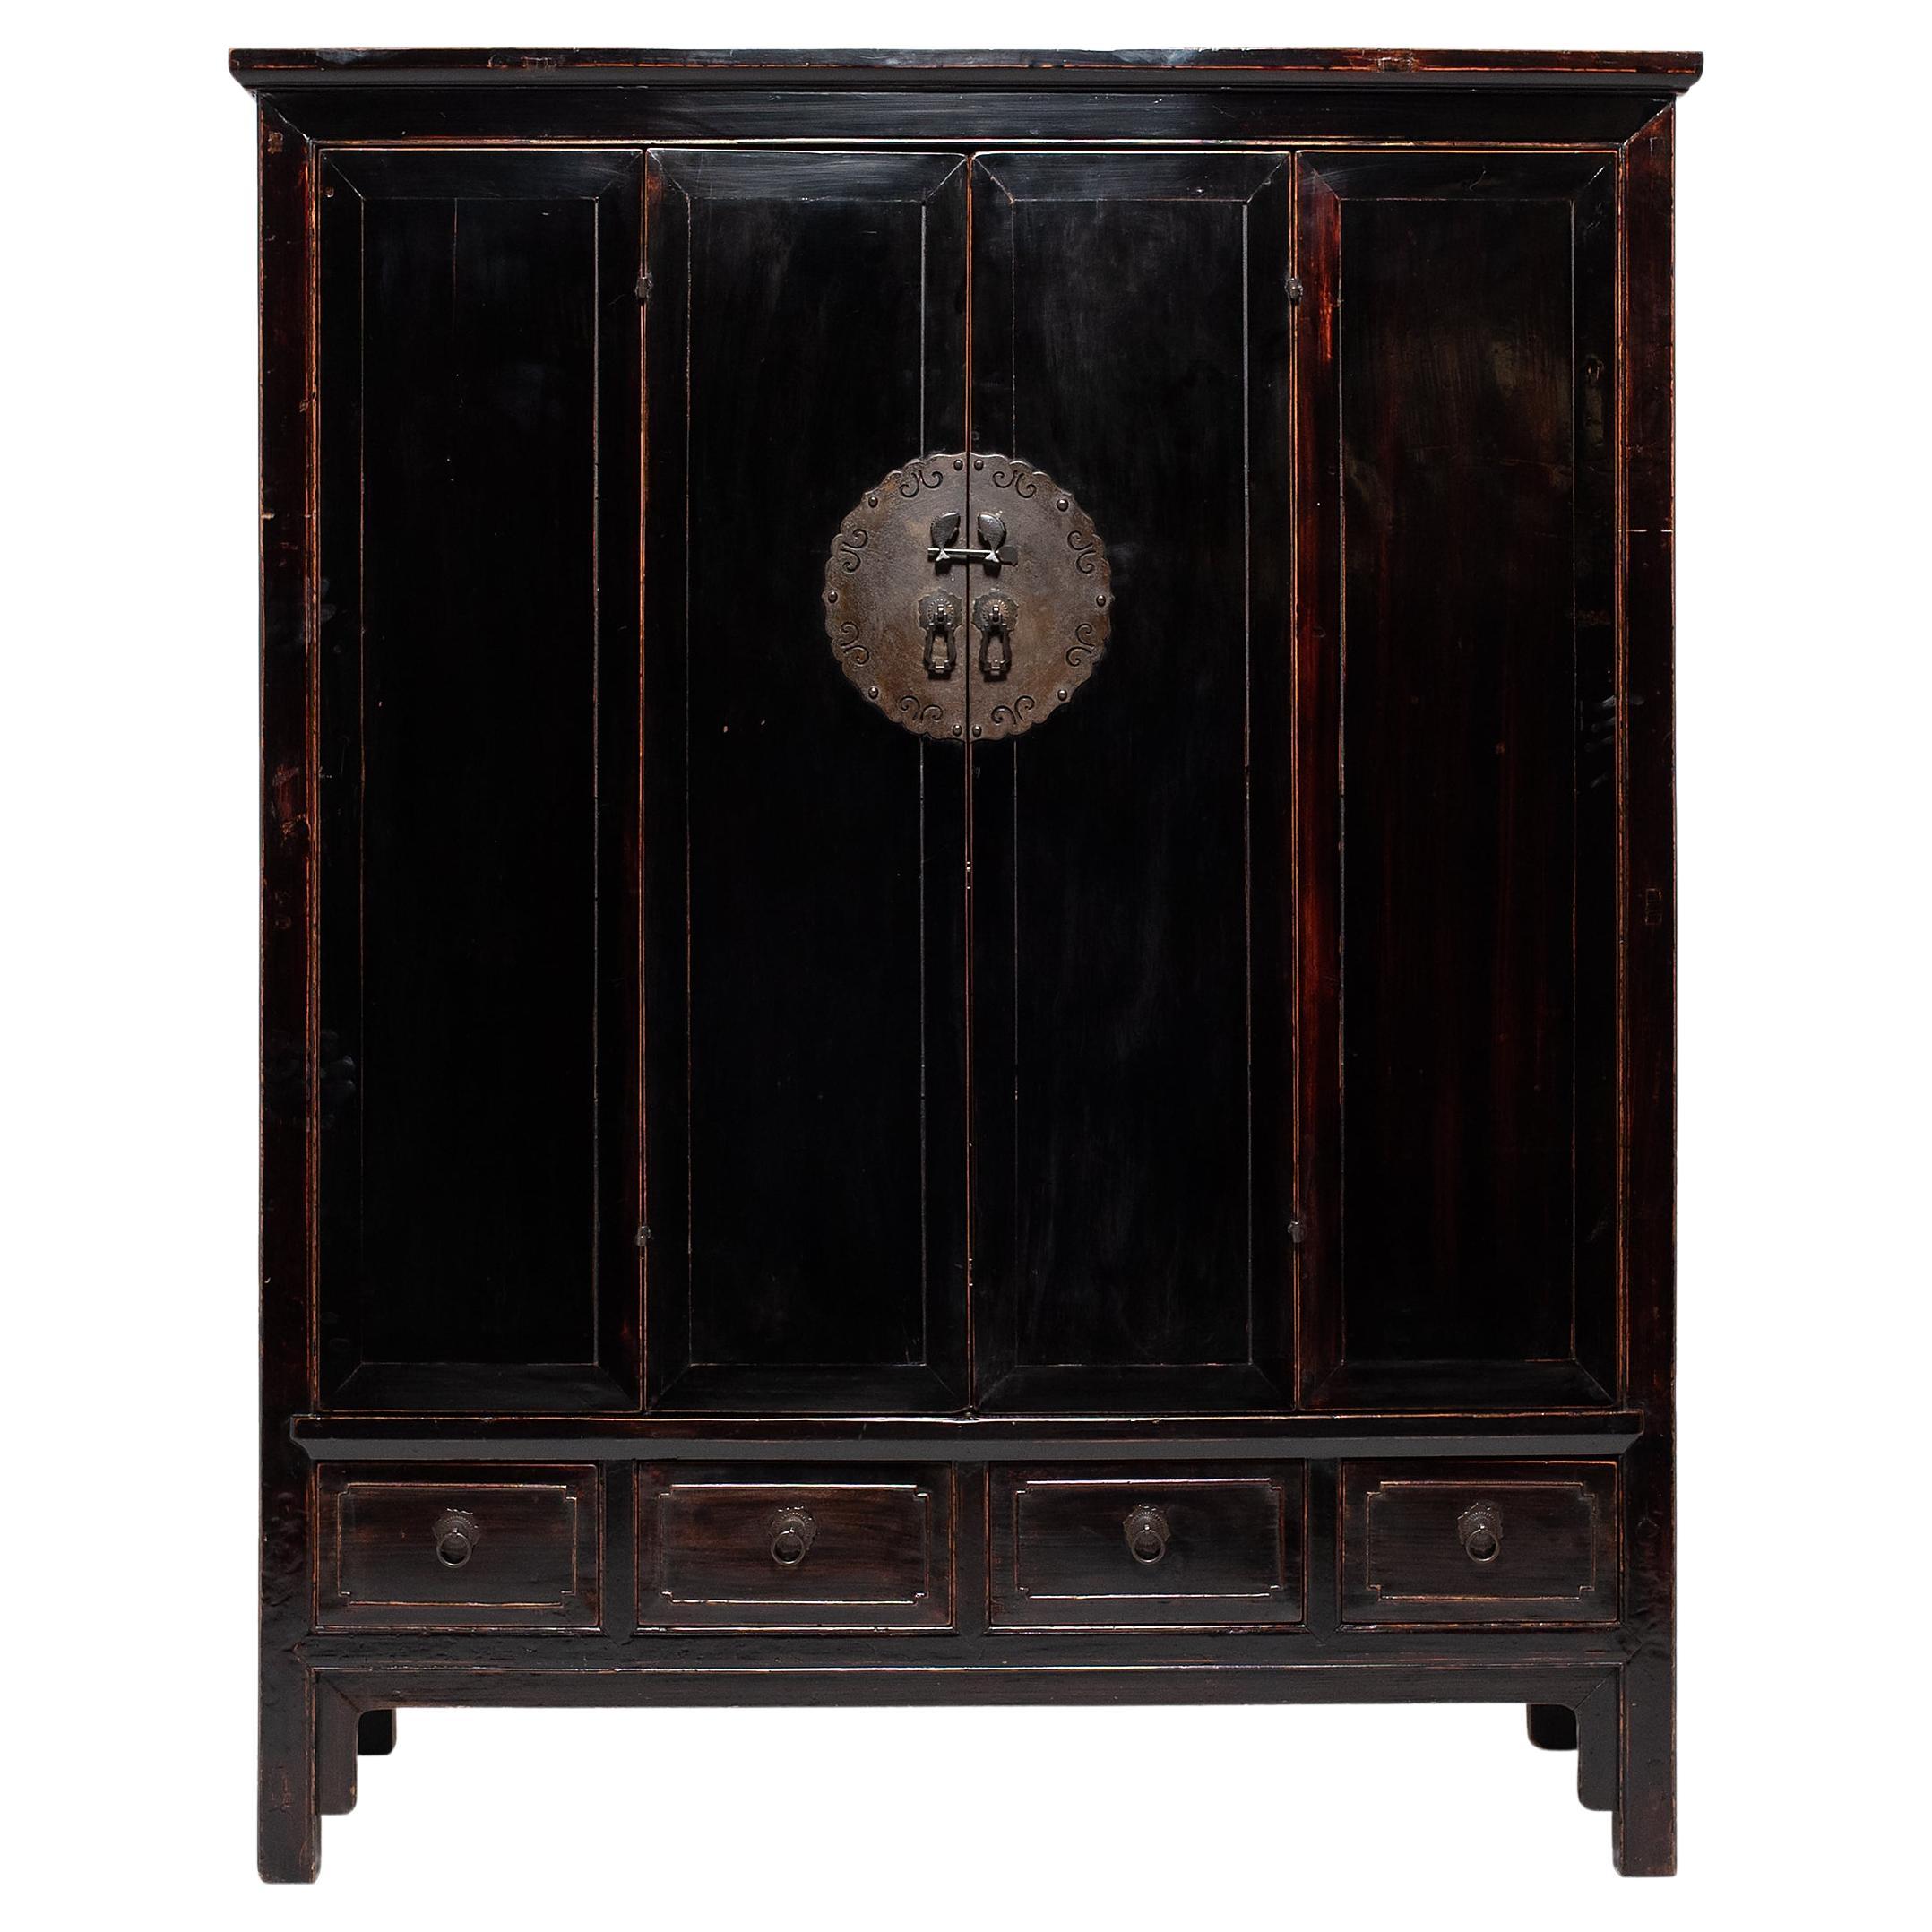 Chinese Black Lacquer Double Fish Cabinet, c. 1850